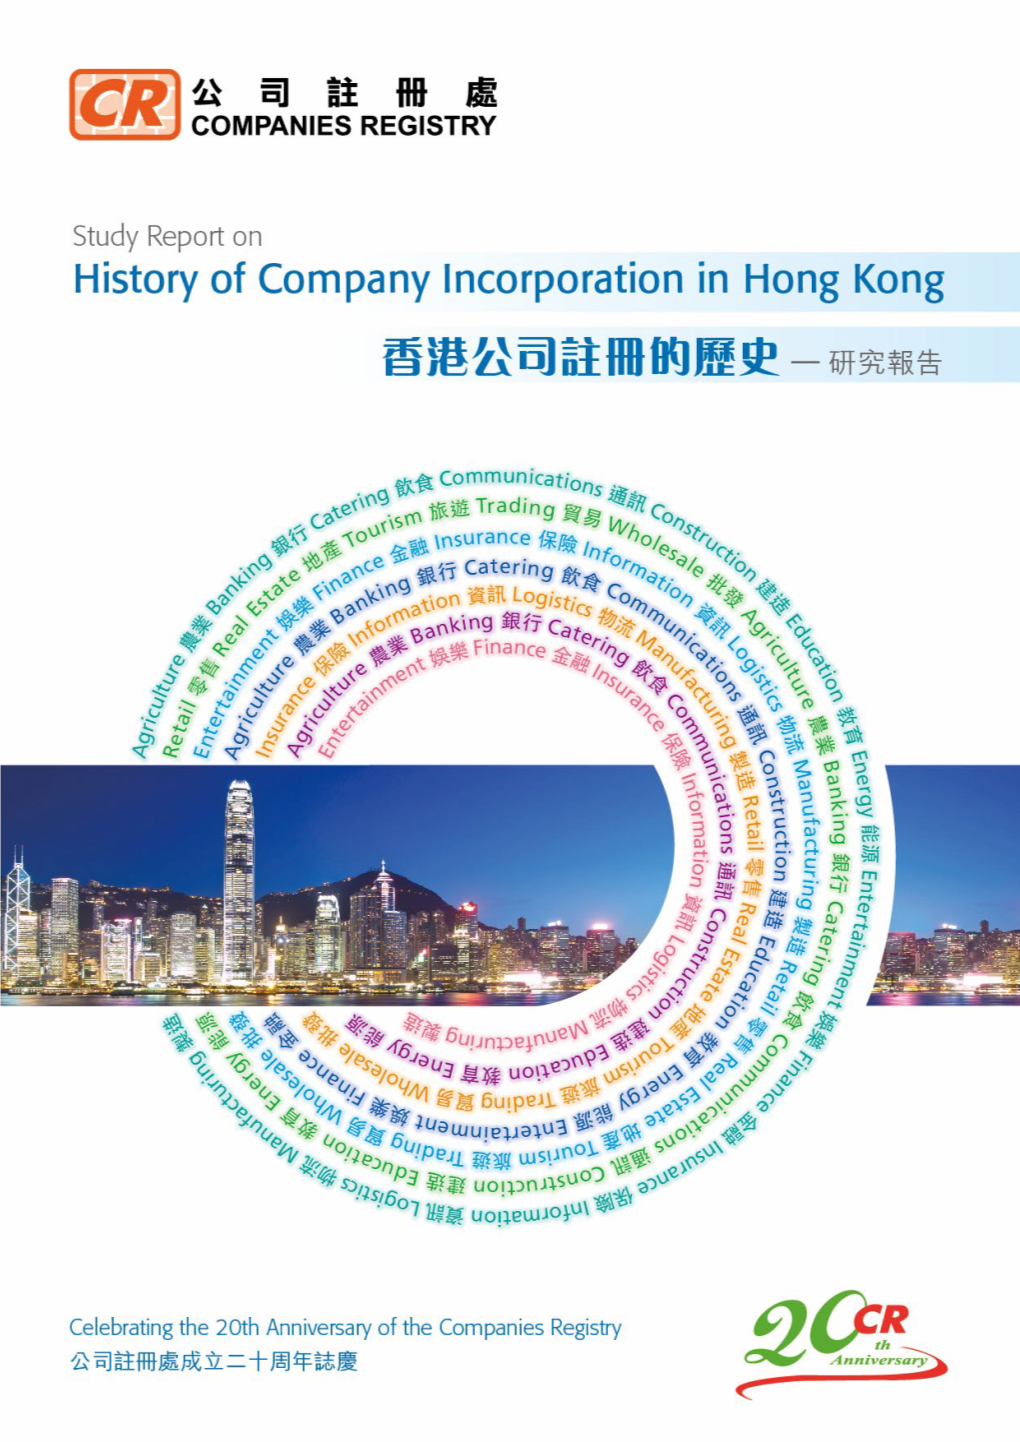 Study Report on History of Company Incorporation in Hong Kong